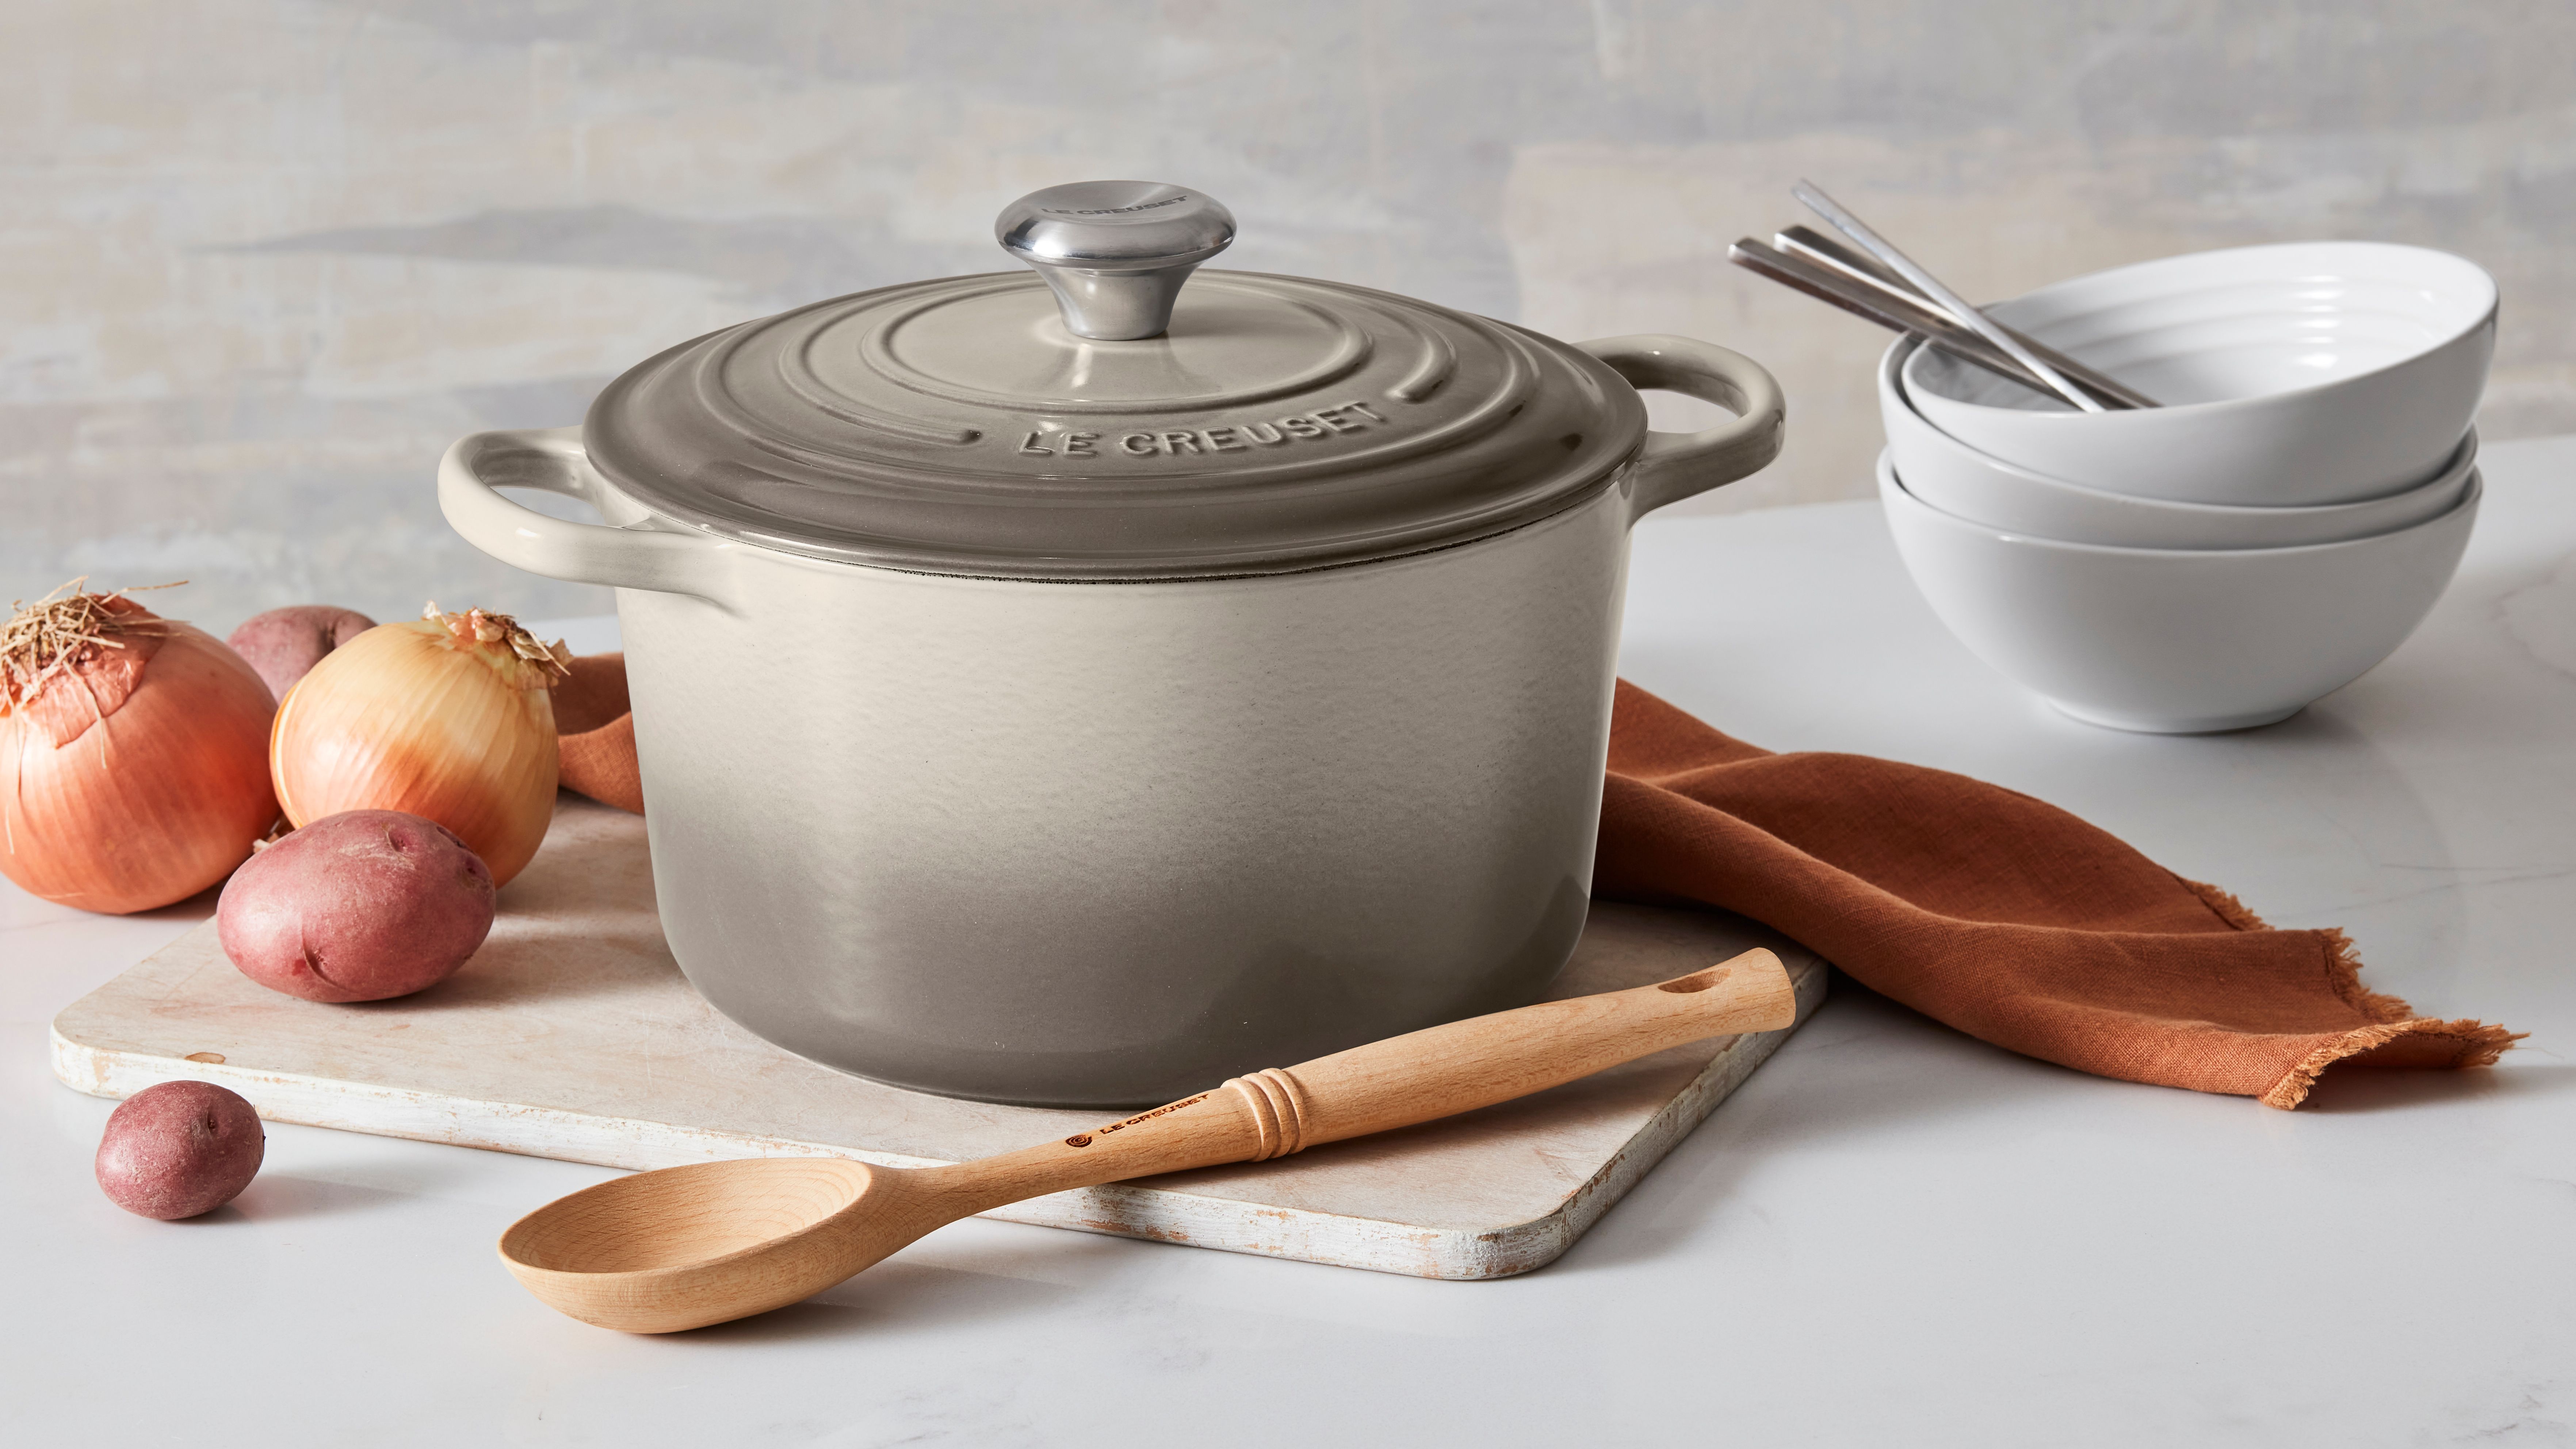 Le Creuset New Fall Releases 2019 - Marble, Rice Cooker